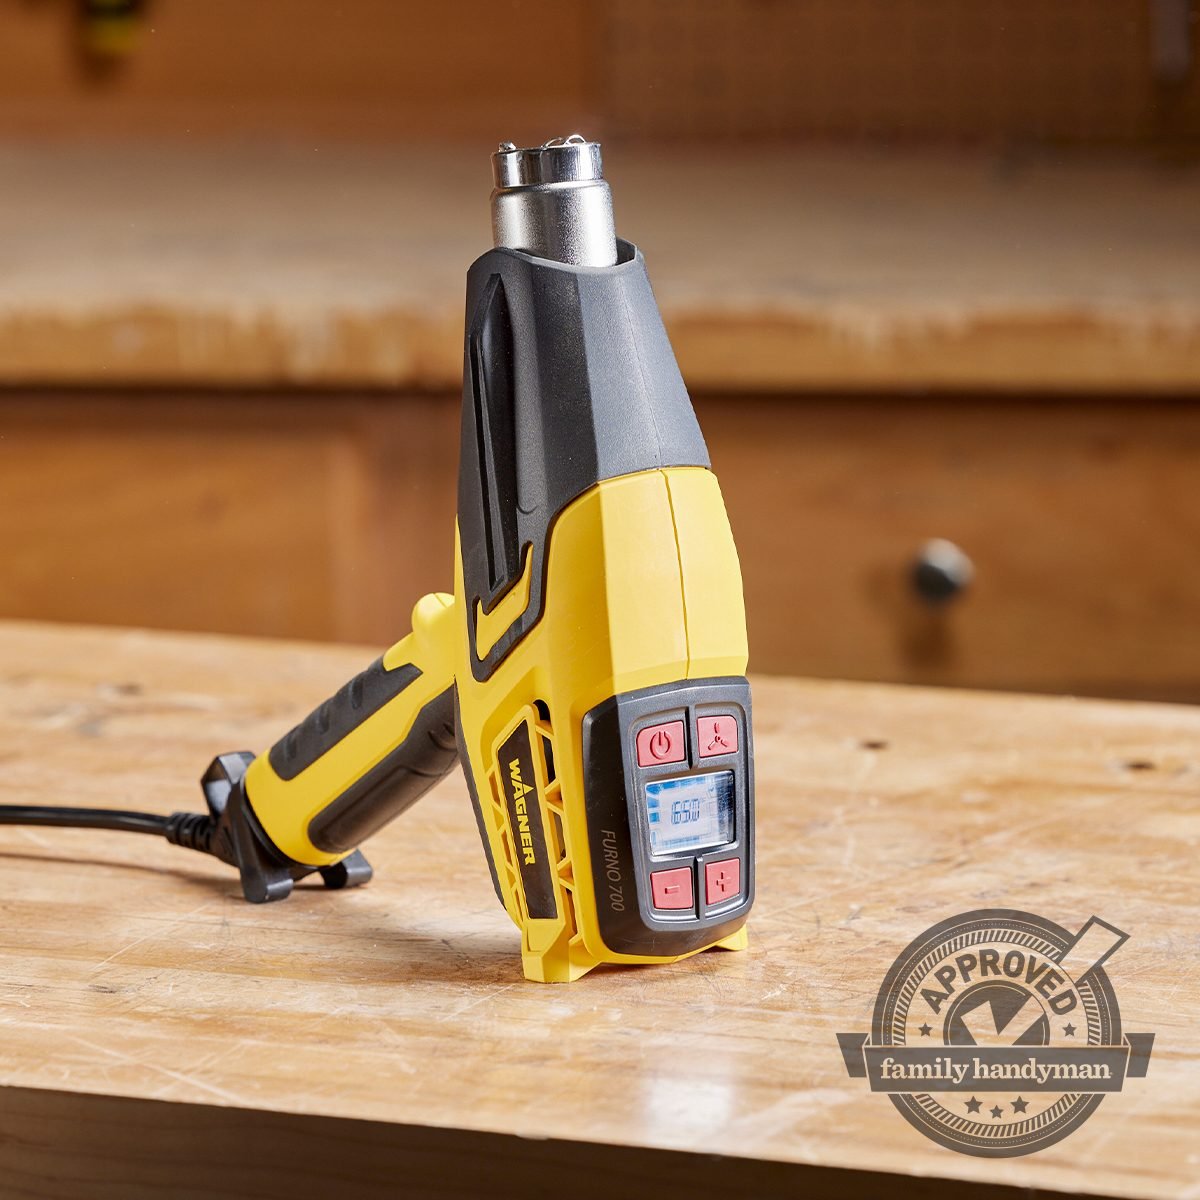 Wagner Furno 700 Heat Gun Review: Family Handyman Approved